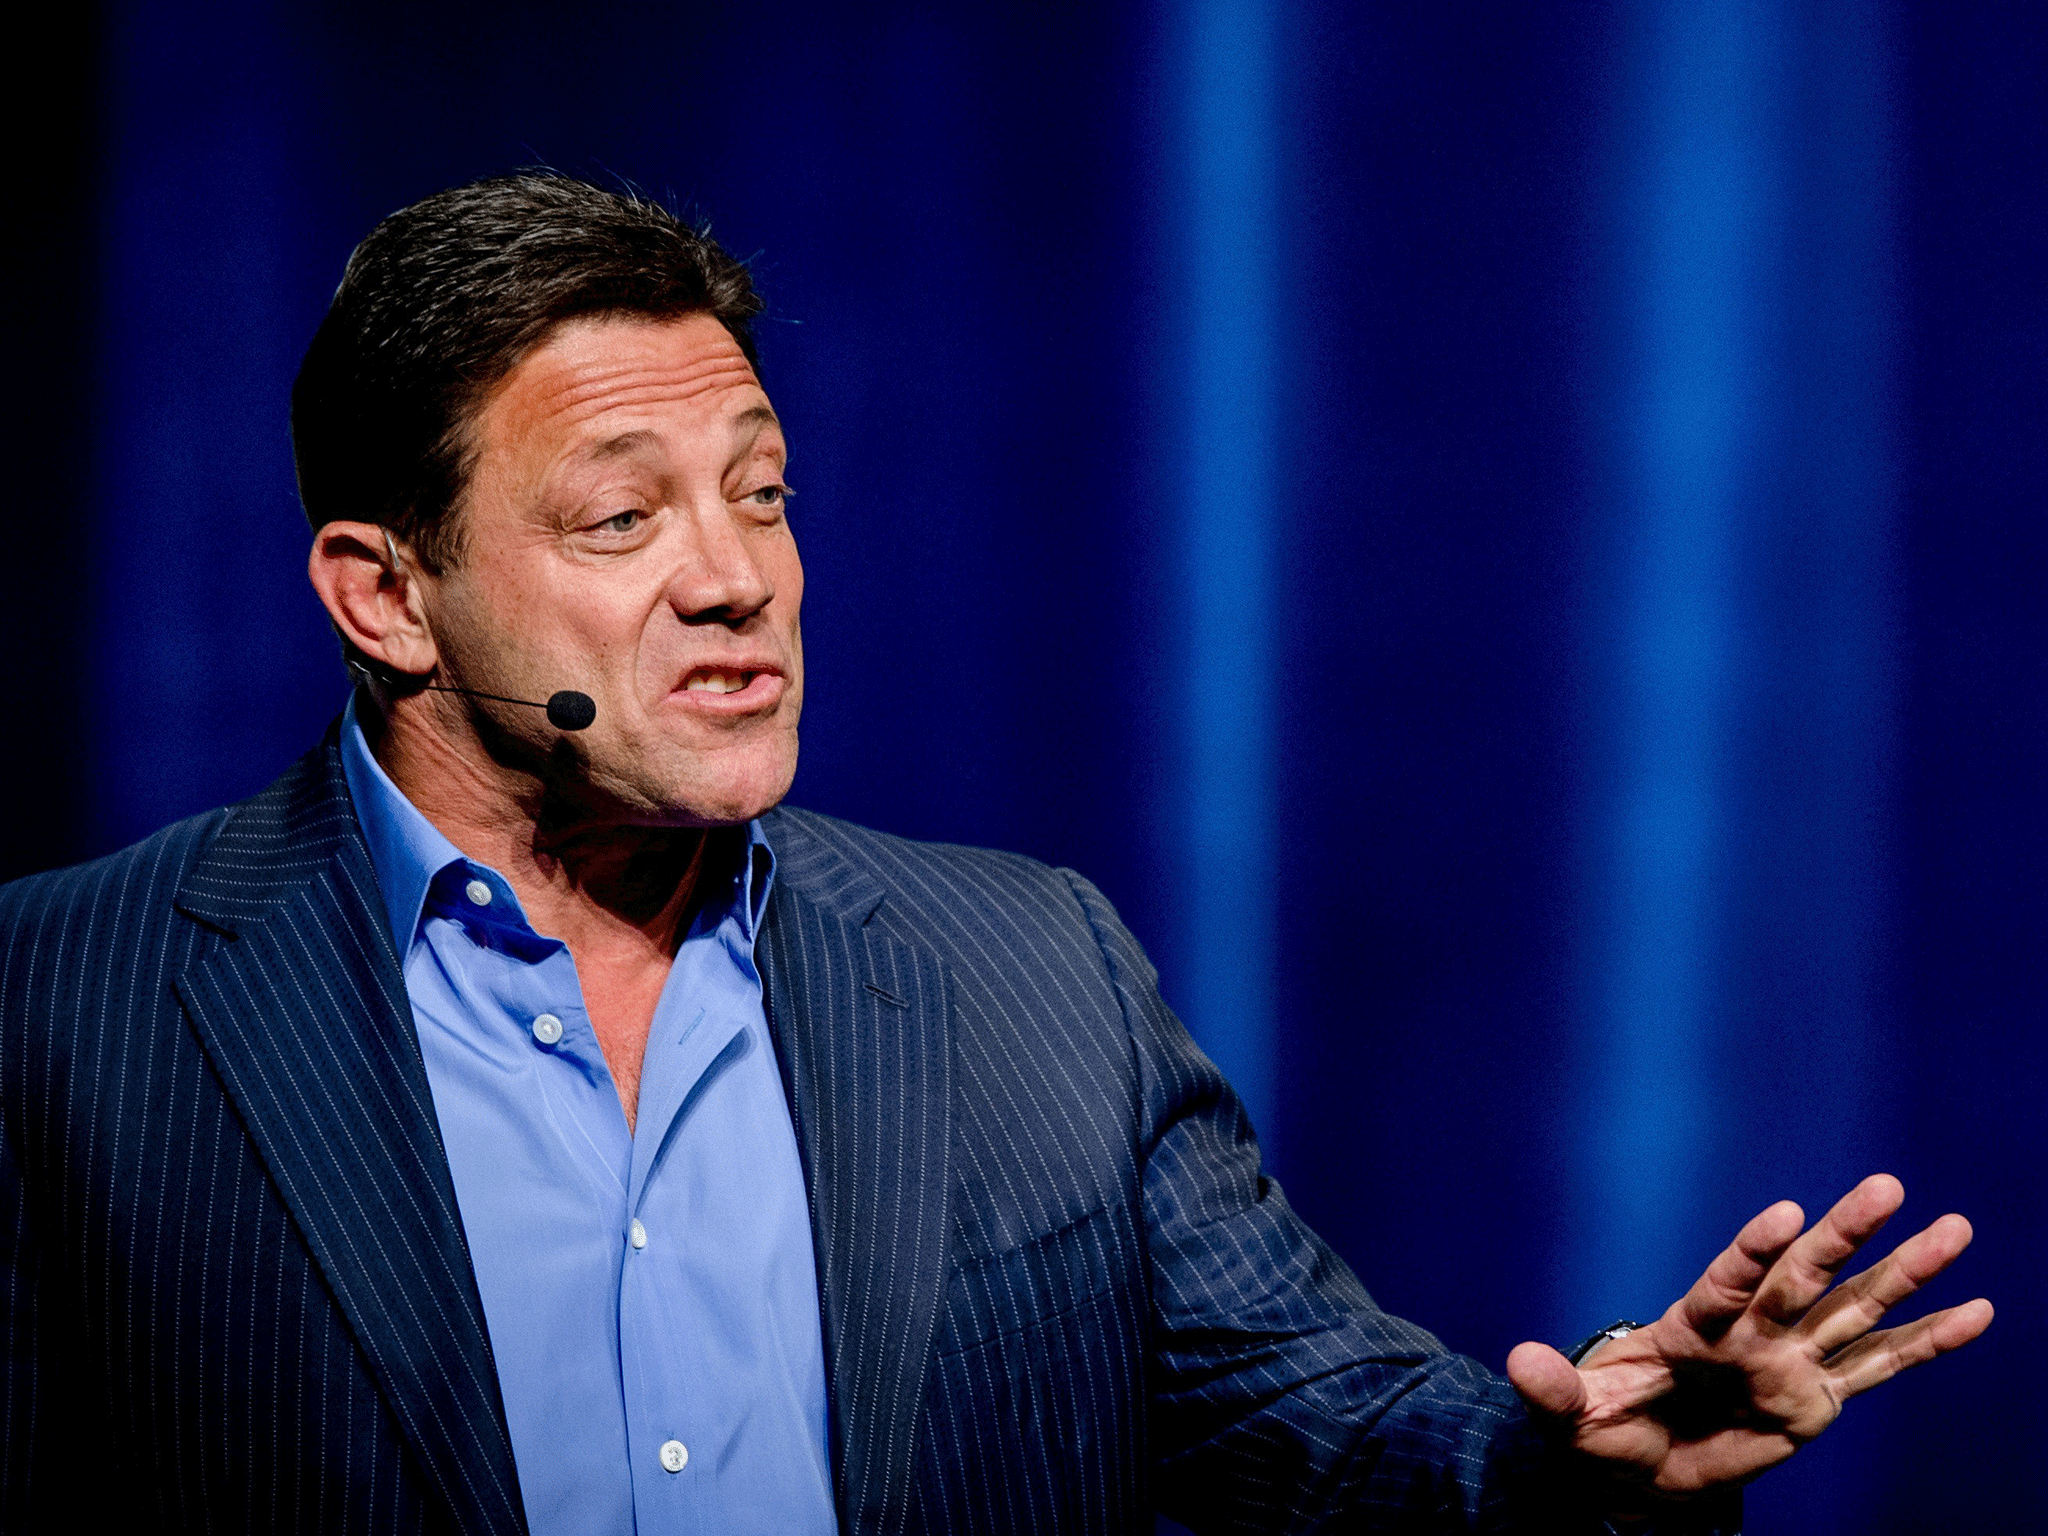 Jordan Belfort: Real Life 'Wolf Of Wall Street' Says Bitcoin Is A 'huge Scam'